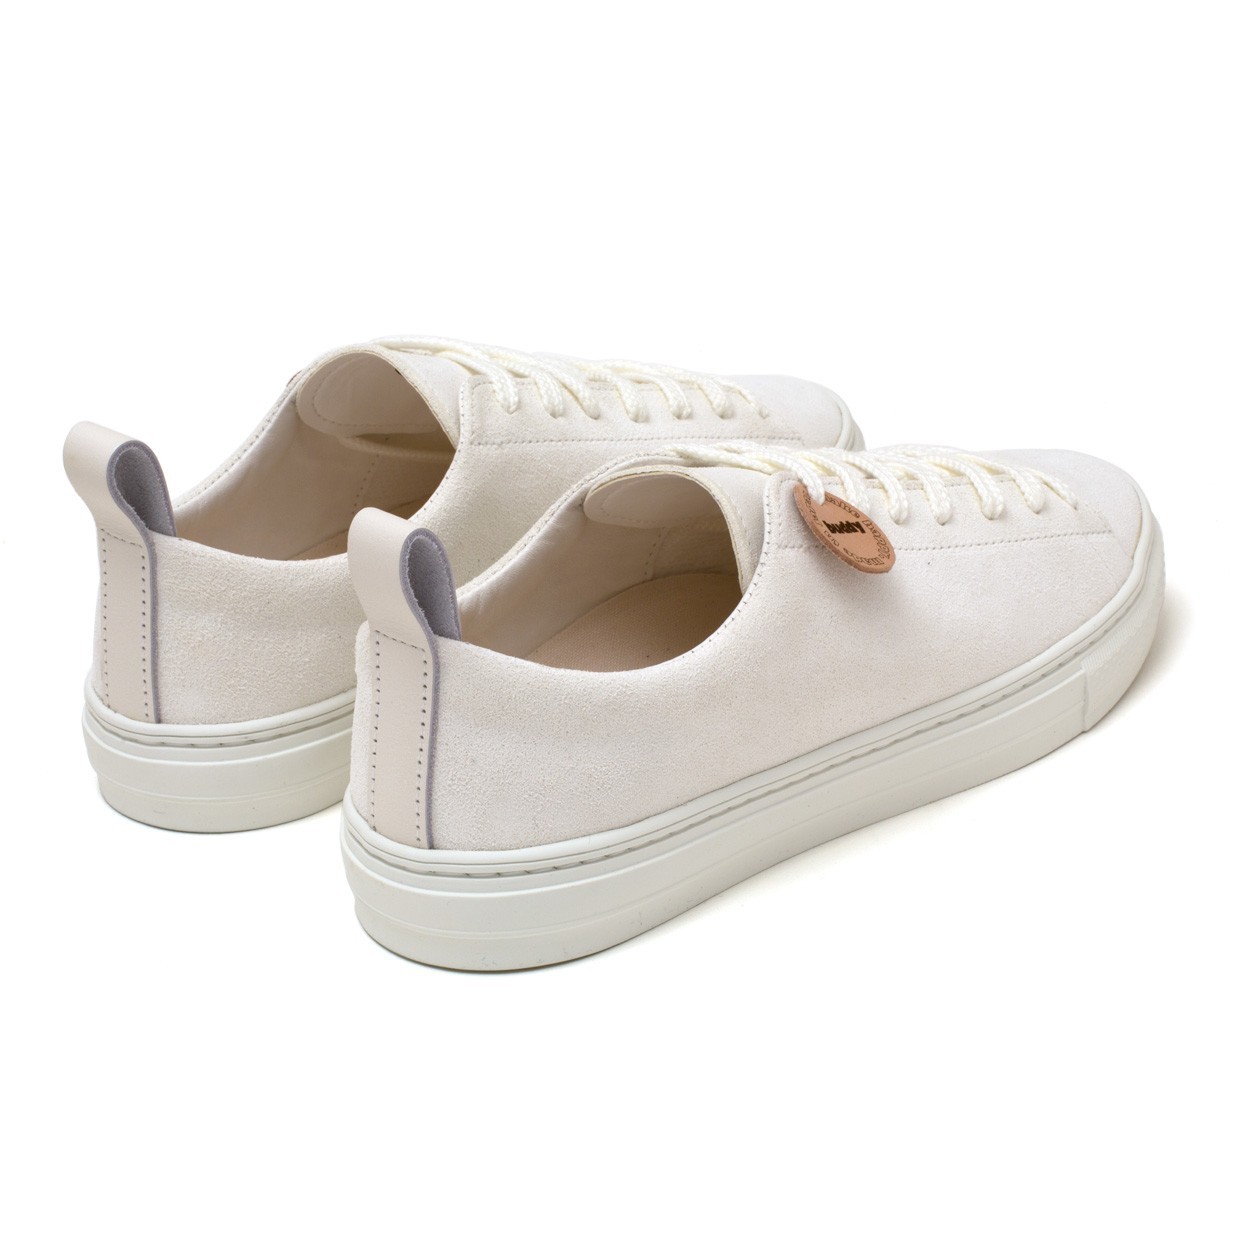 Bull Terrier Low Chubby Suede Blanc